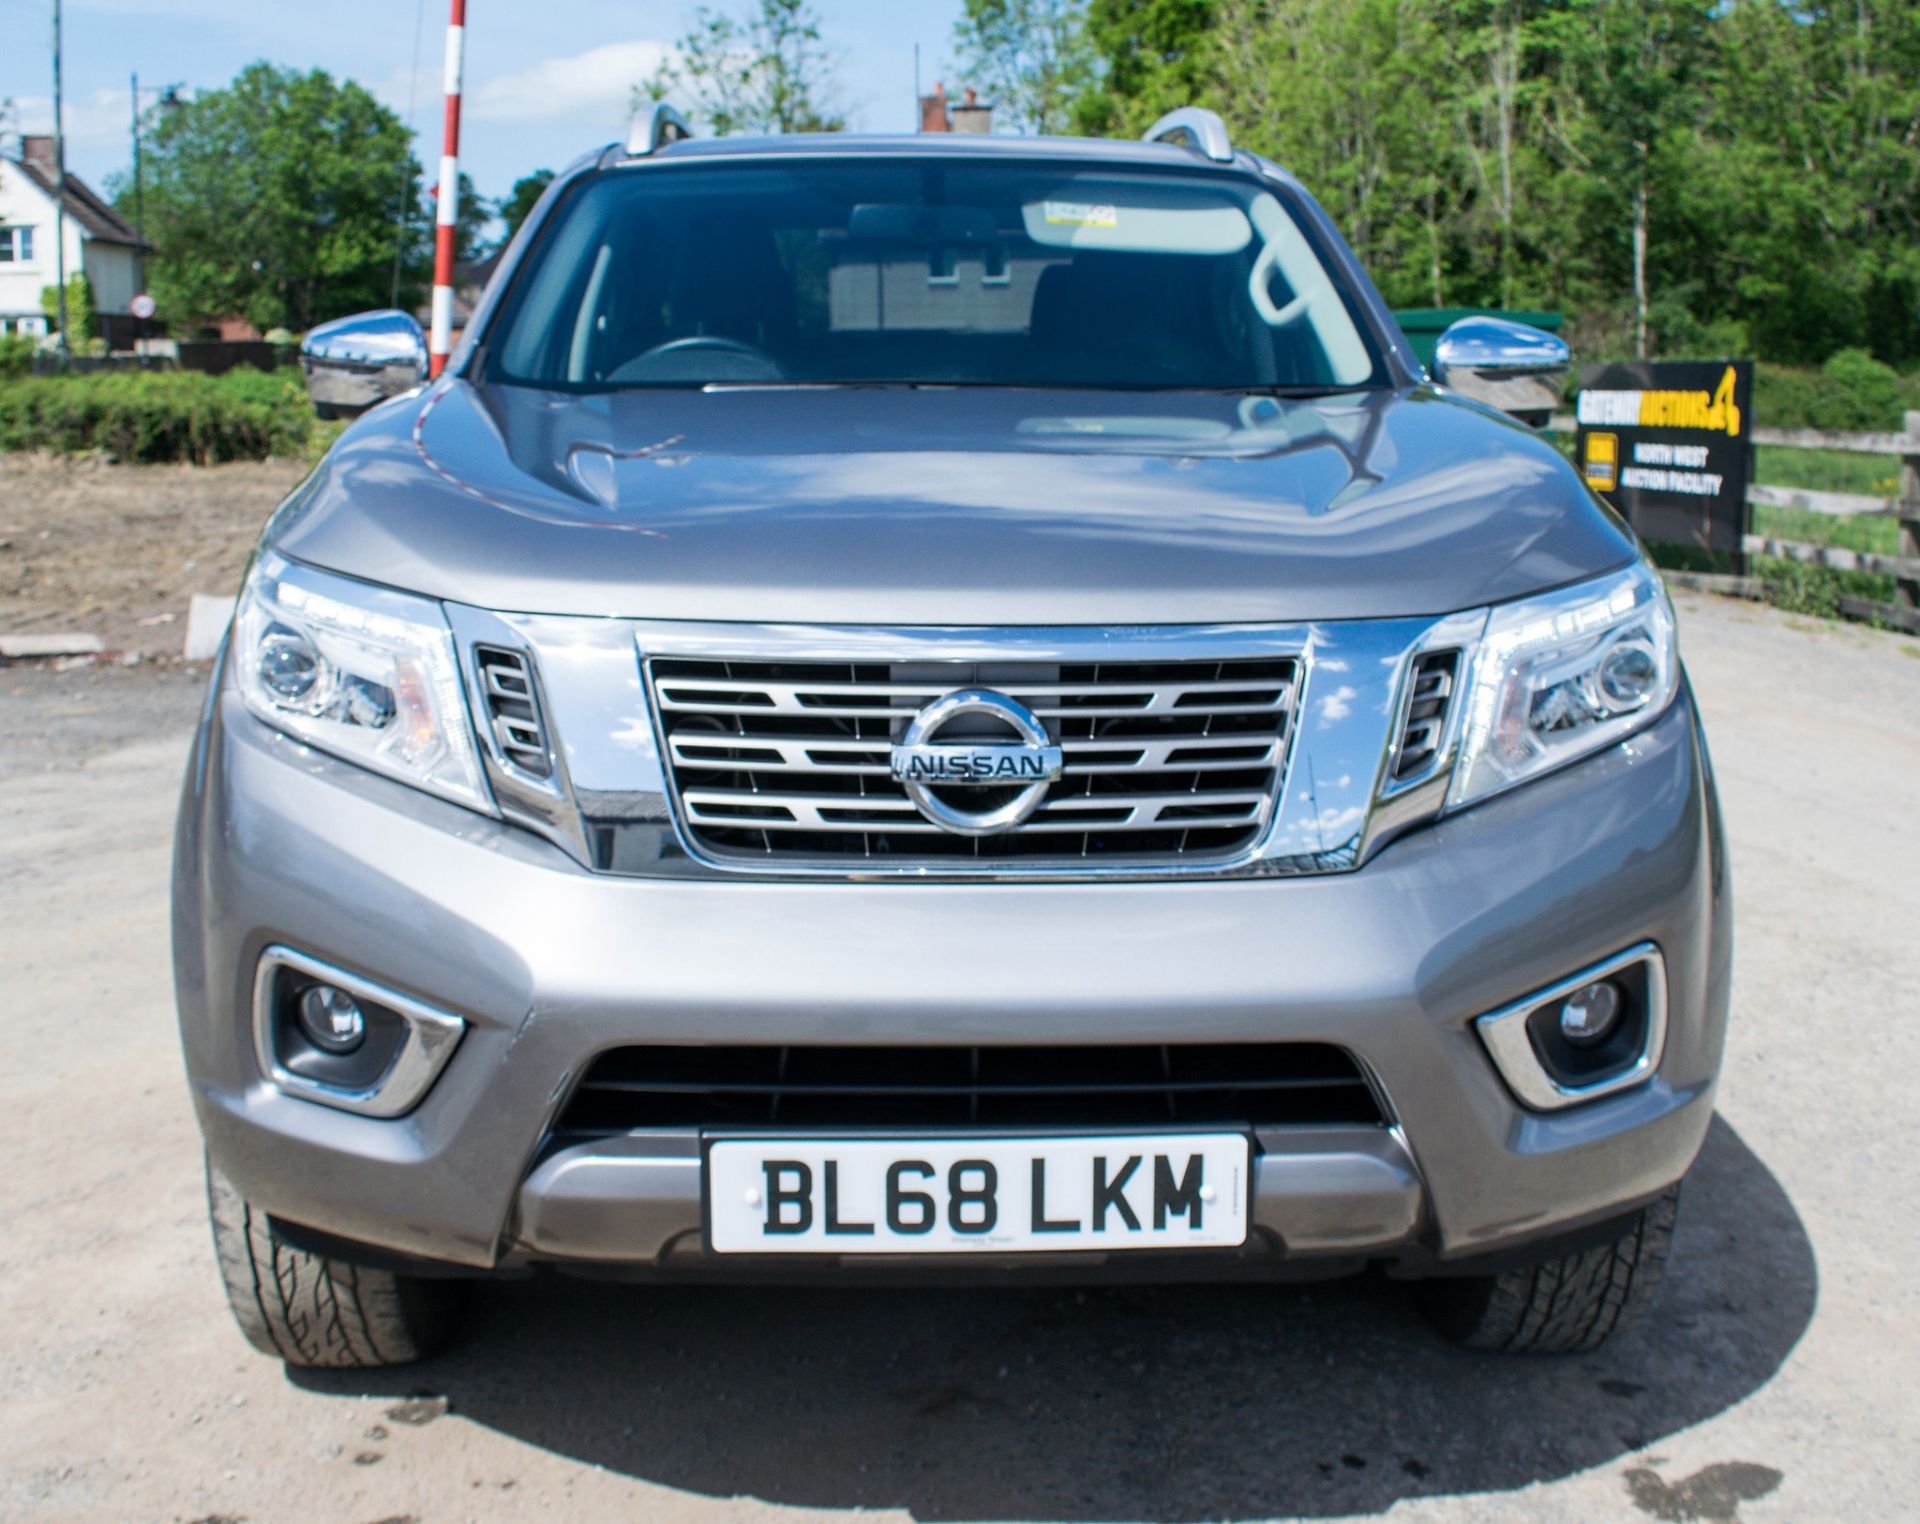 Nissan Navara Tekna DCi Auto double cab pick up truck Registration Number: BL68 LKM Date of - Image 5 of 25